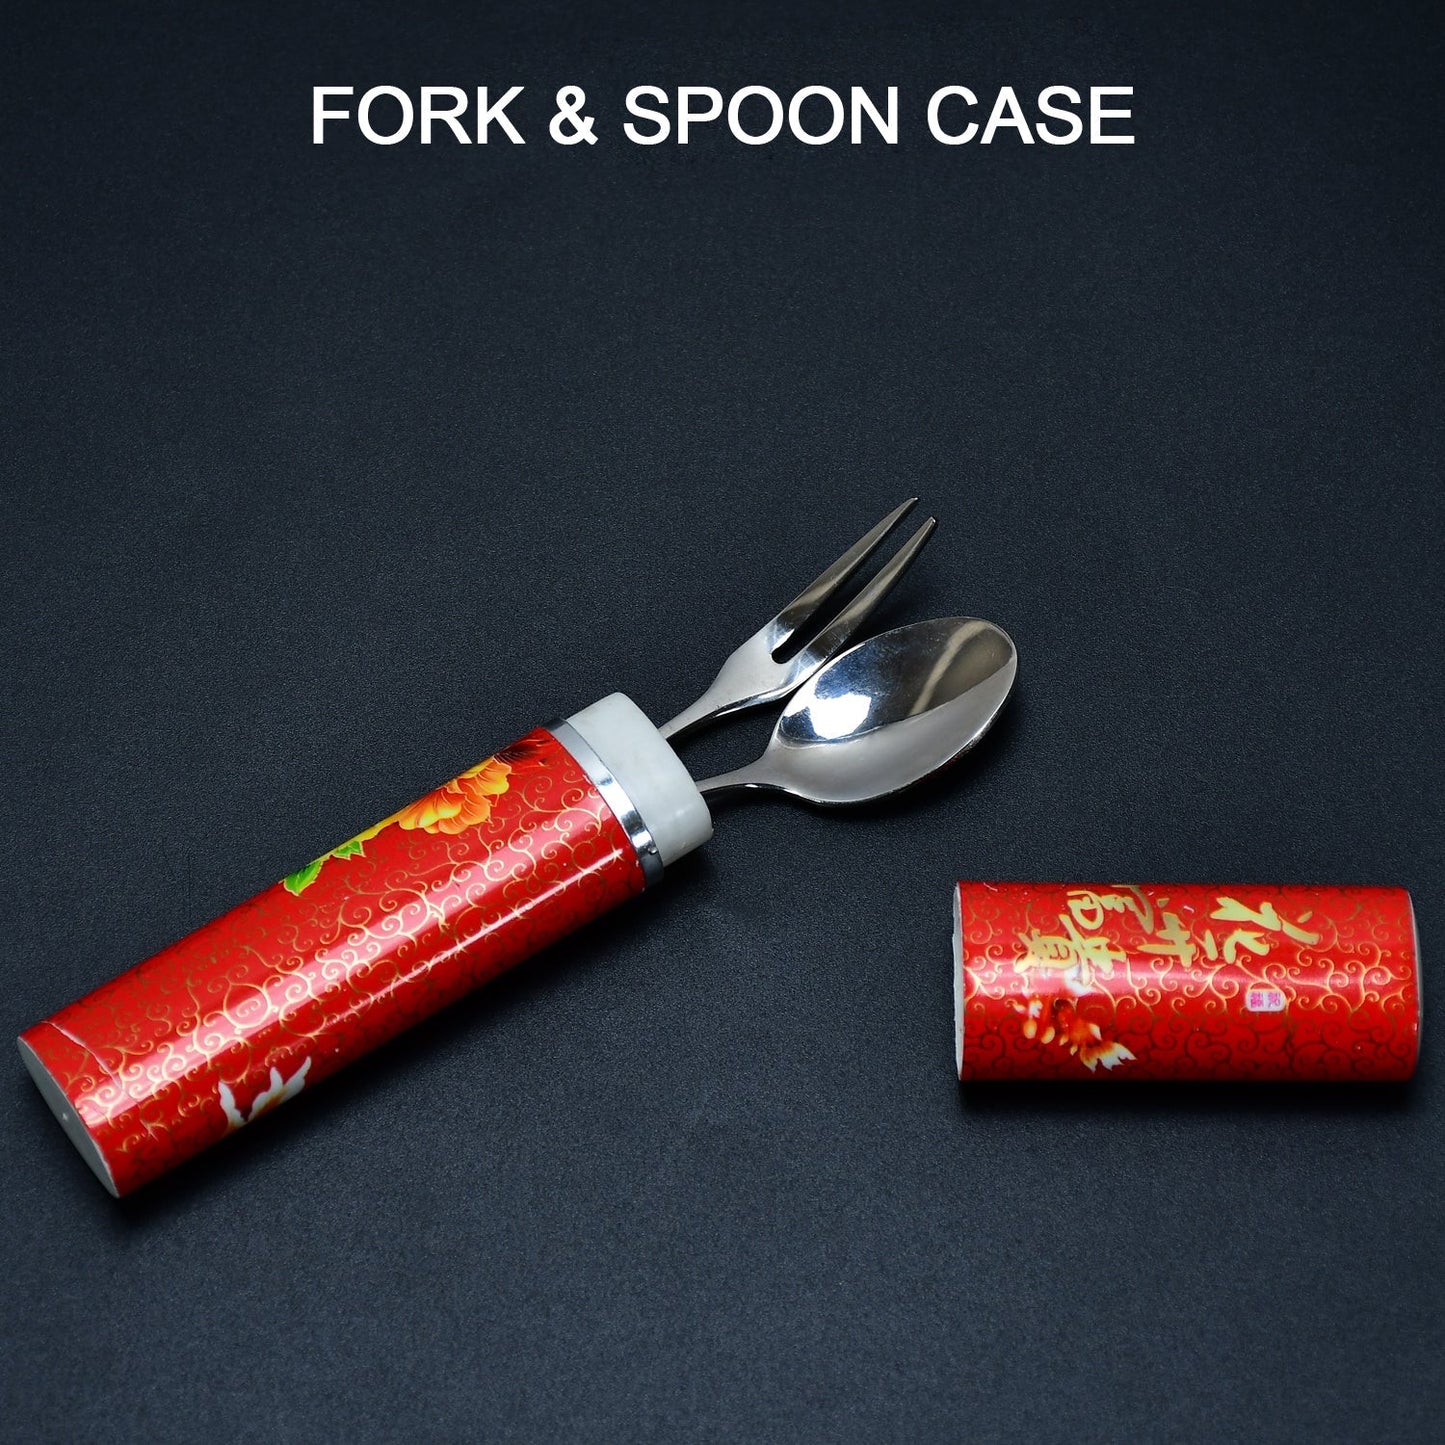 7071  Stainless Steel Table Spoon & Fork With Attractive Cover      ( 1 pcs ) Dukandaily